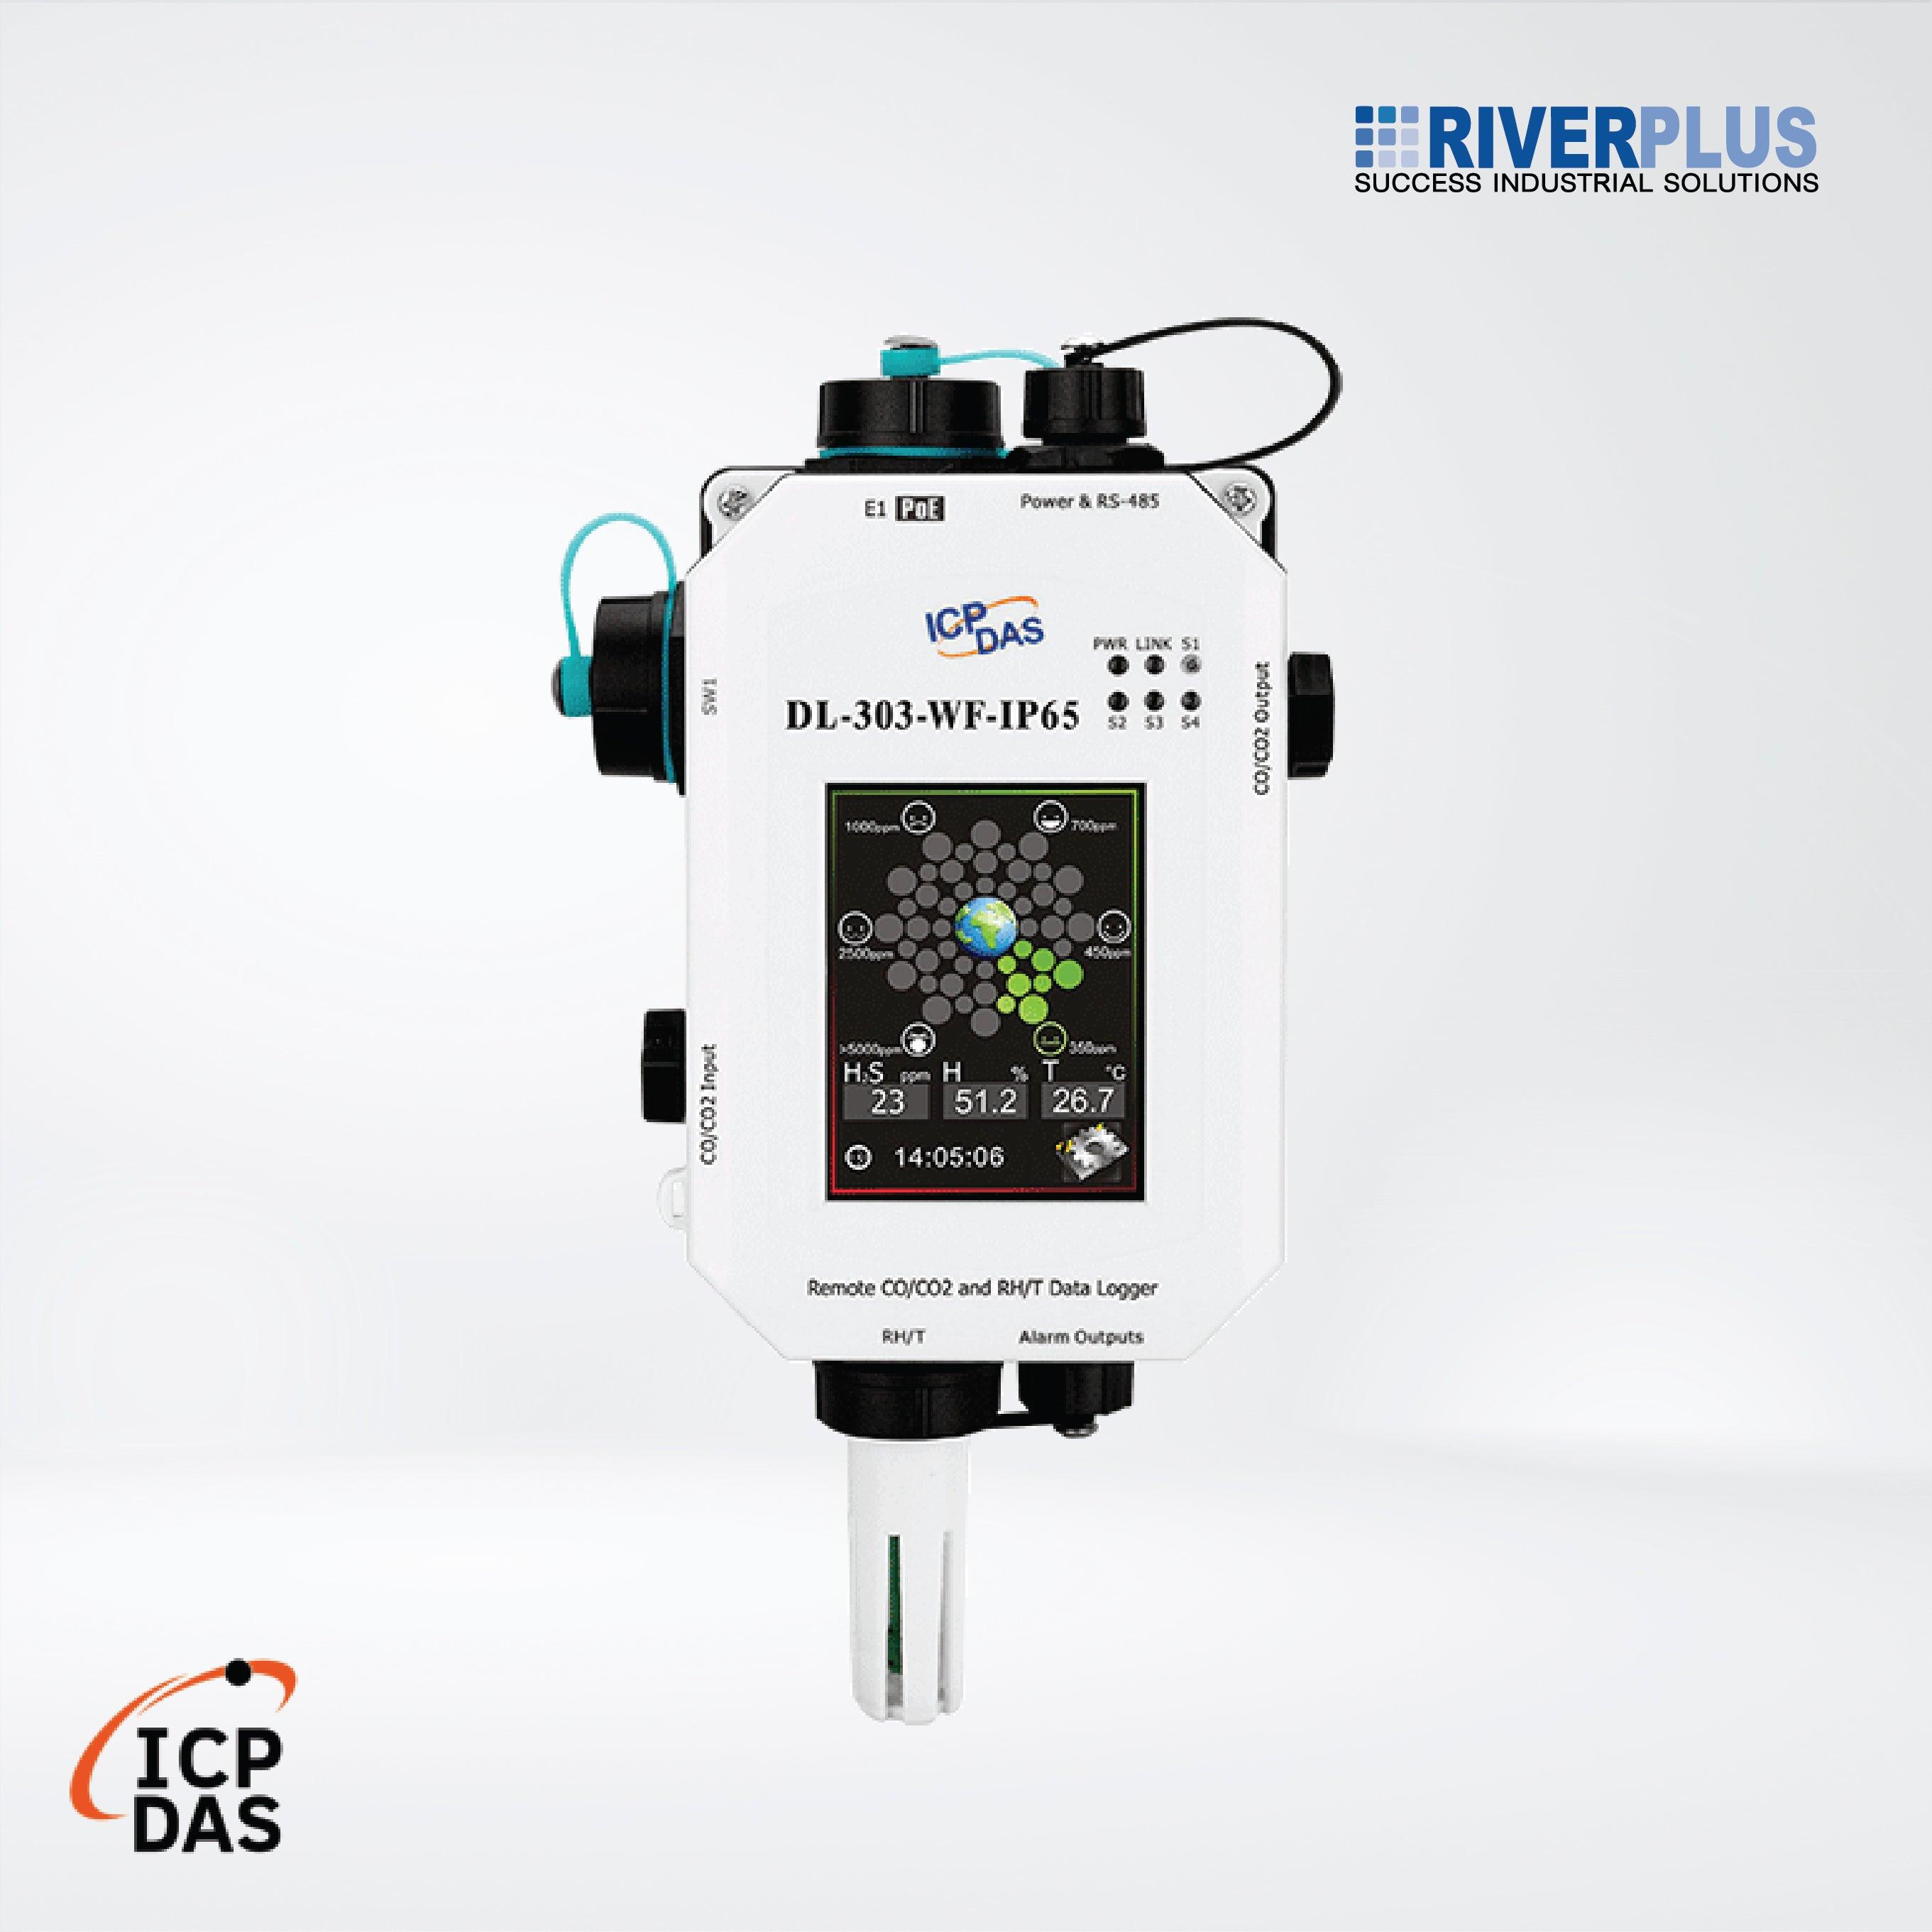 DL-303-WF-IP65 IP65 Remote CO/CO2/Temperature/Humidity/Dew Point Data Logger - Riverplus